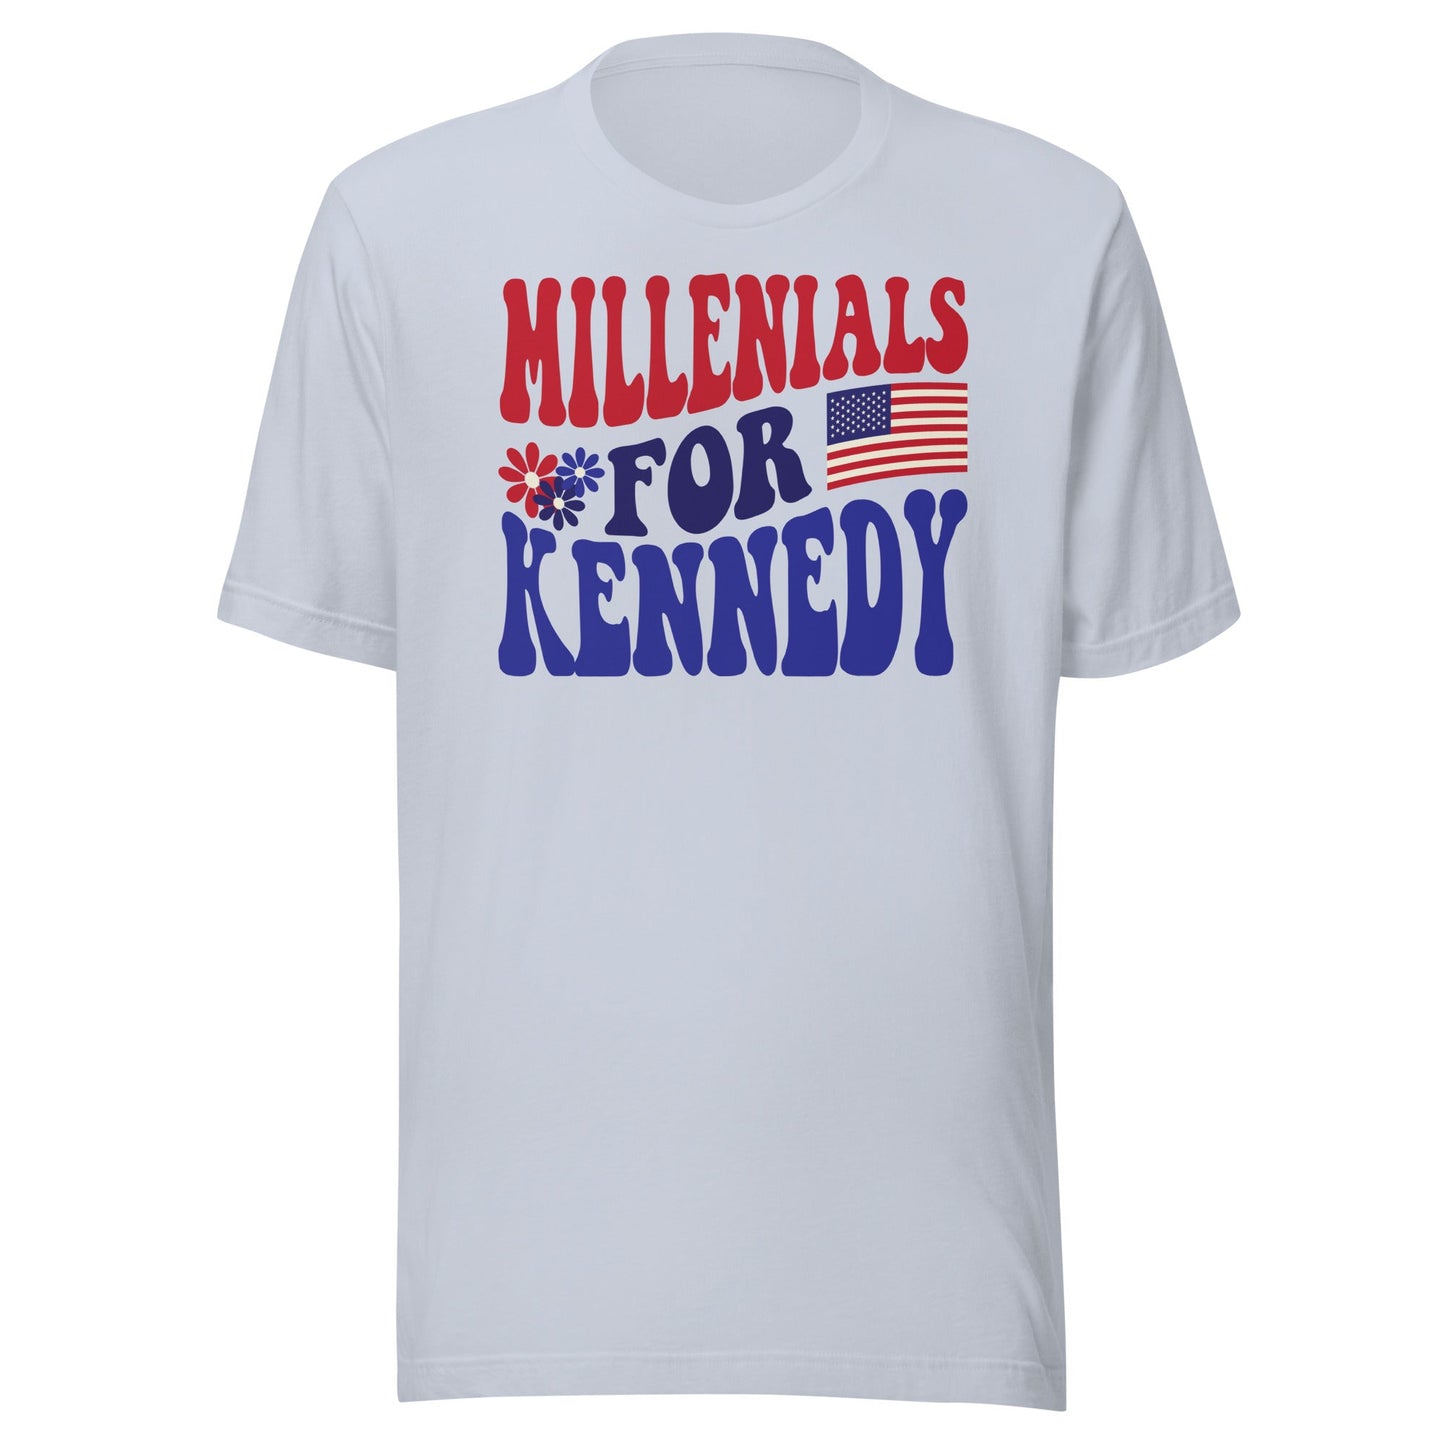 Millennials for Kennedy Unisex Tee - TEAM KENNEDY. All rights reserved